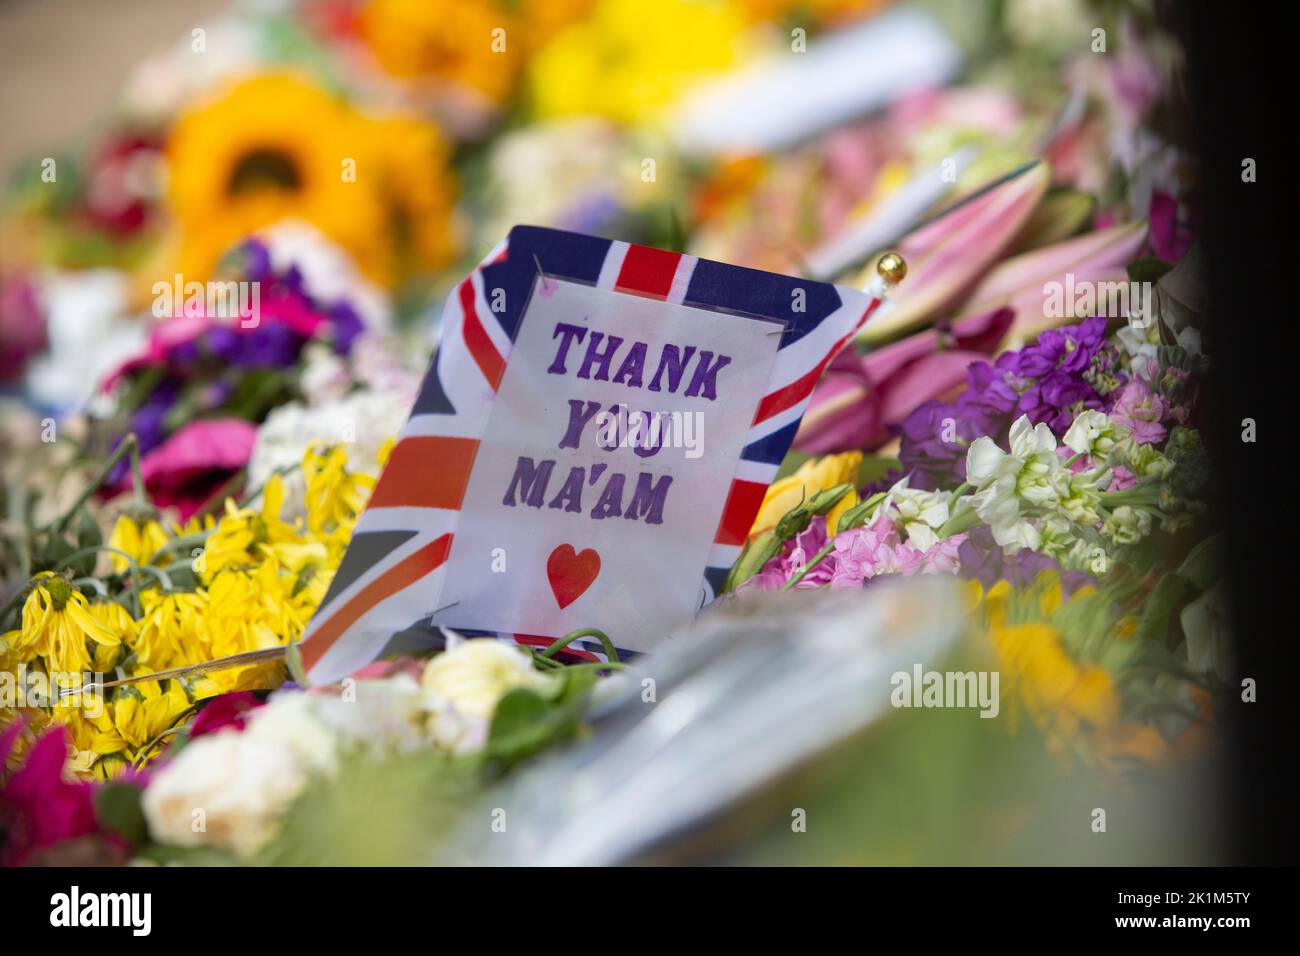 Edinburgh 19th September 2022. Funeral of The Queen Elizabeth II on 19th September 2022 take place in London. A big screen has been installed in Hollyrood gardens in Edinburgh where members of the public can go and see the funeral. Pic Credit: Pako Mera/Alamy Live News Stock Photo